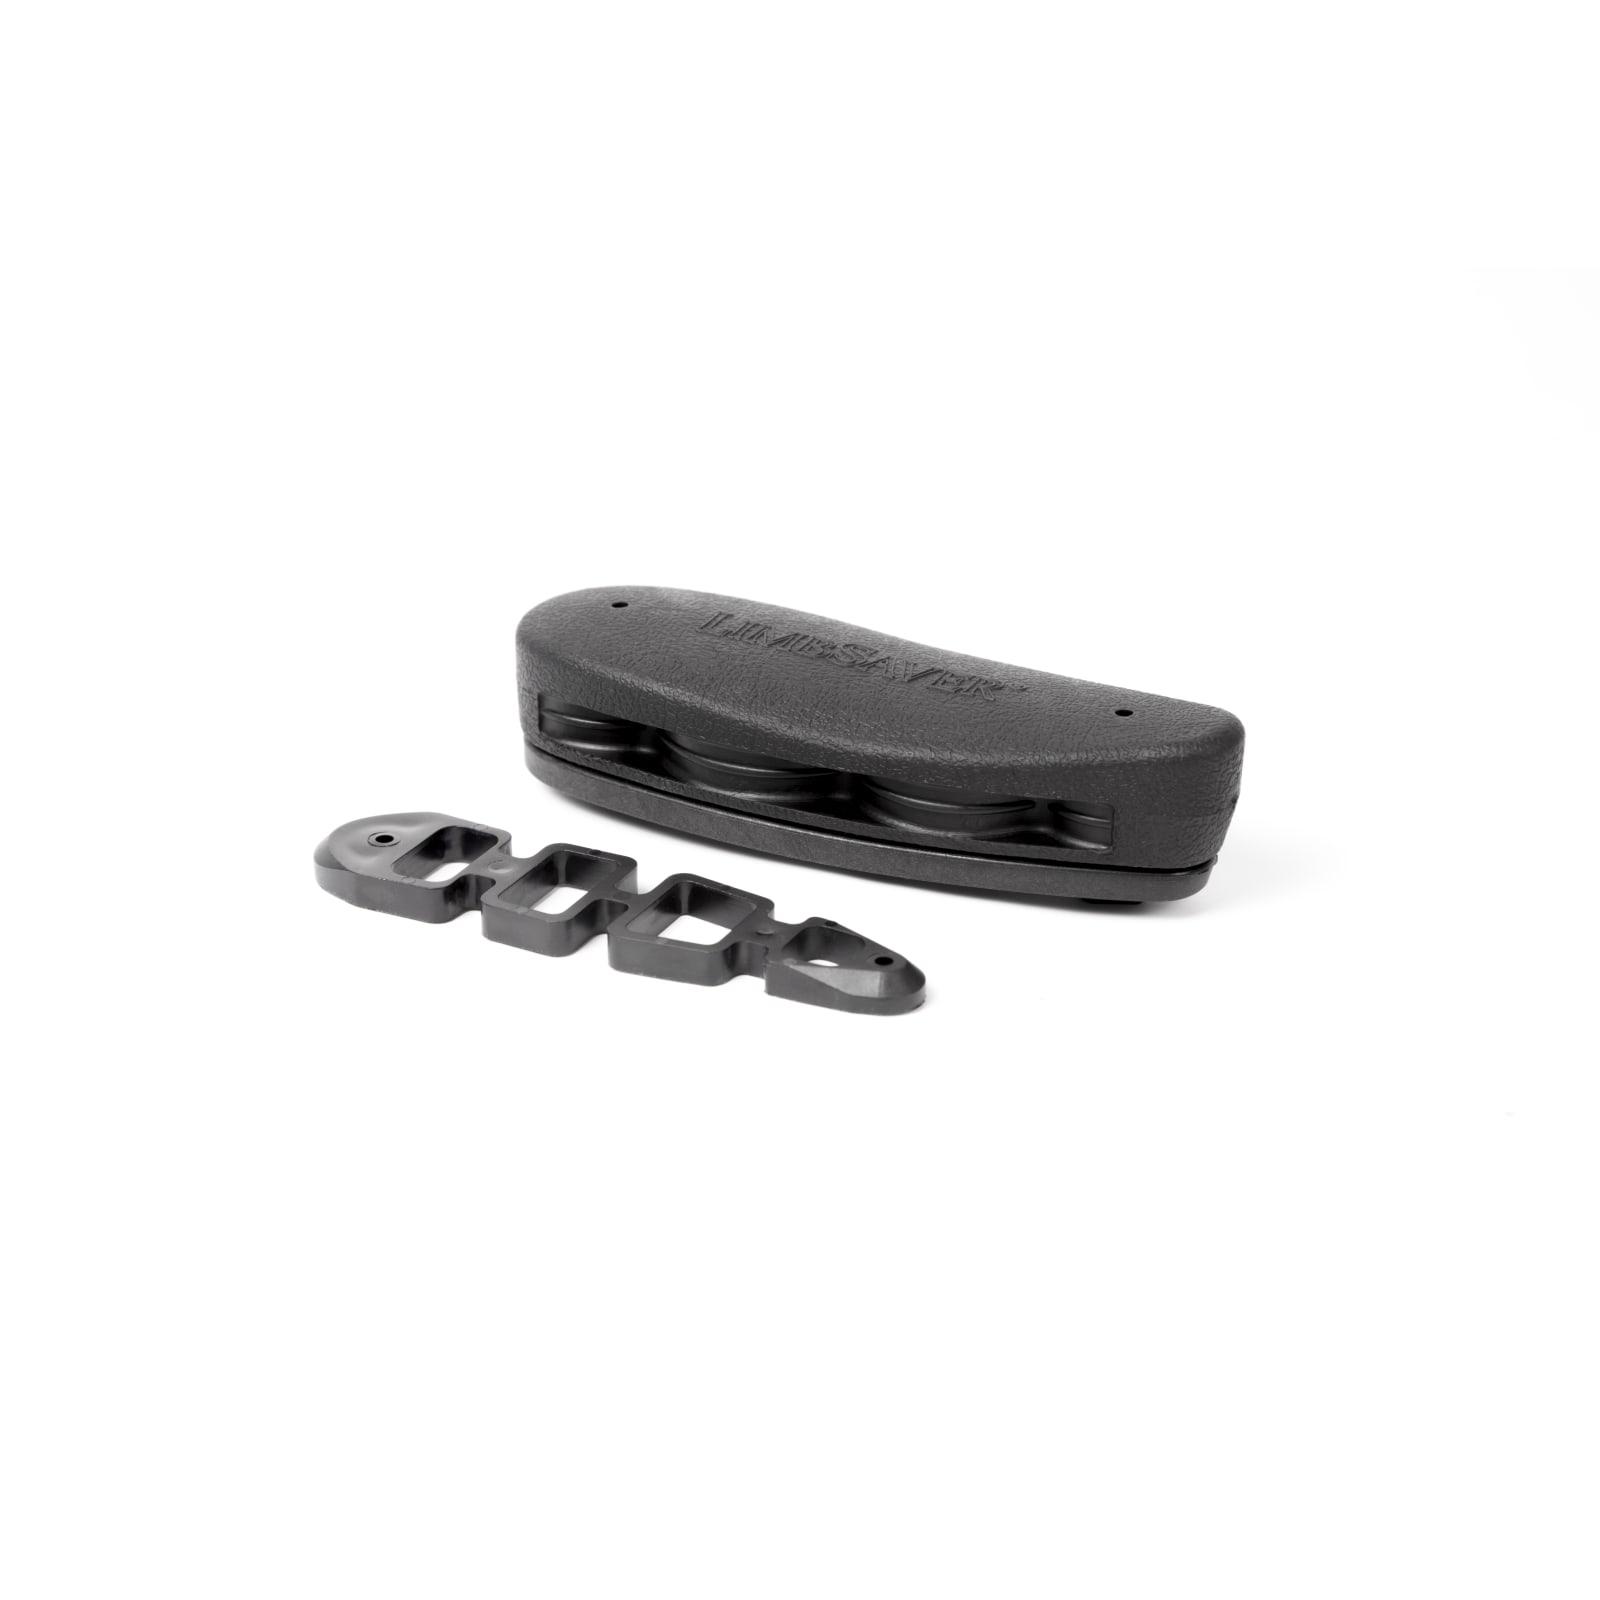 AIRTECH Precision-Fit Recoil Pad - 10810 by LimbSaver at Fleet Farm